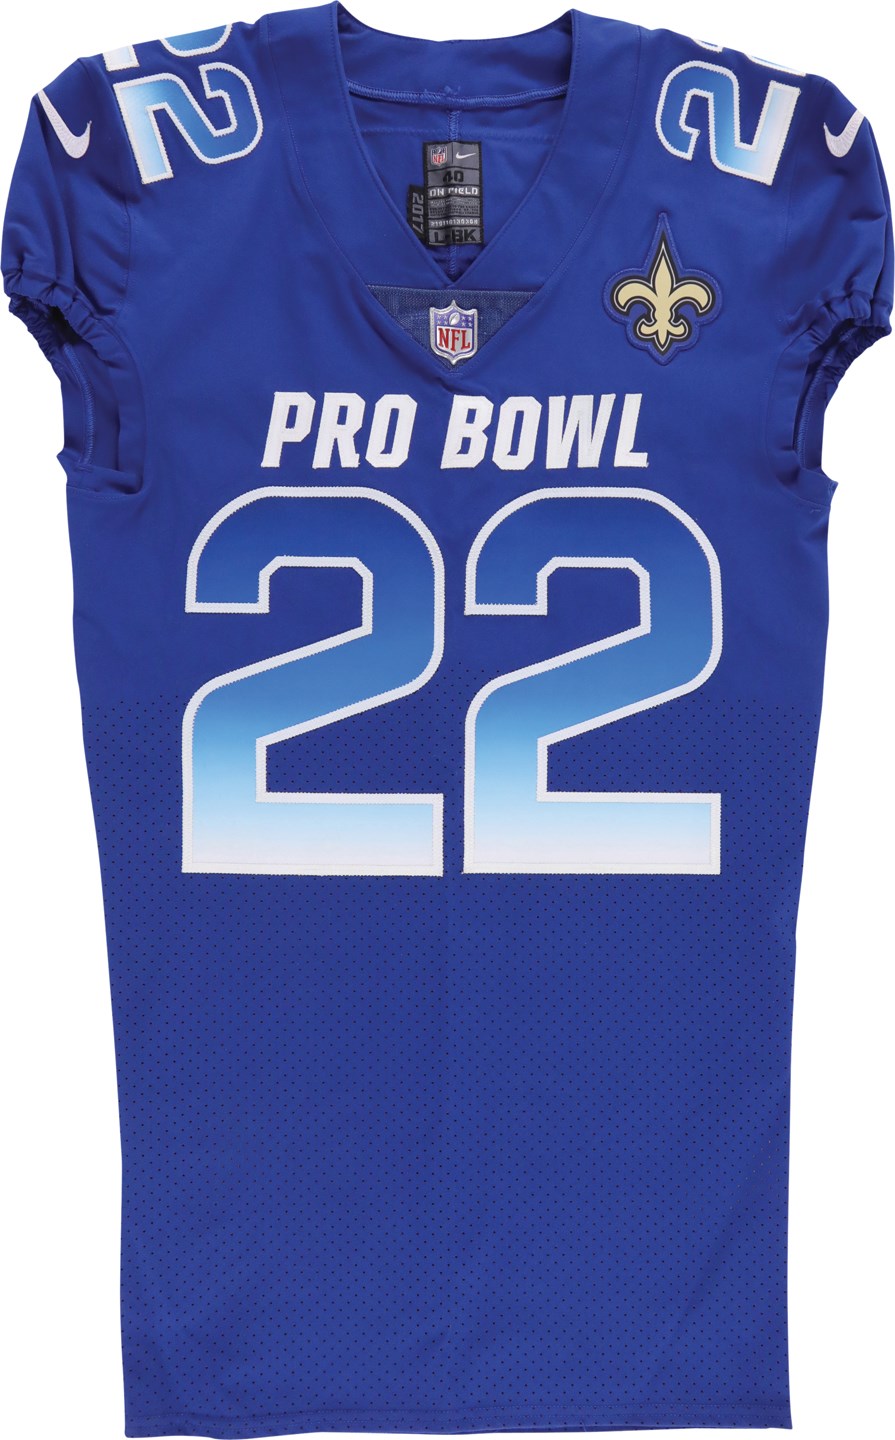 Football - 2017 Mark Ingram Game Worn Pro Bowl Jersey Signed and Swapped with Adrian Peterson (PSA)